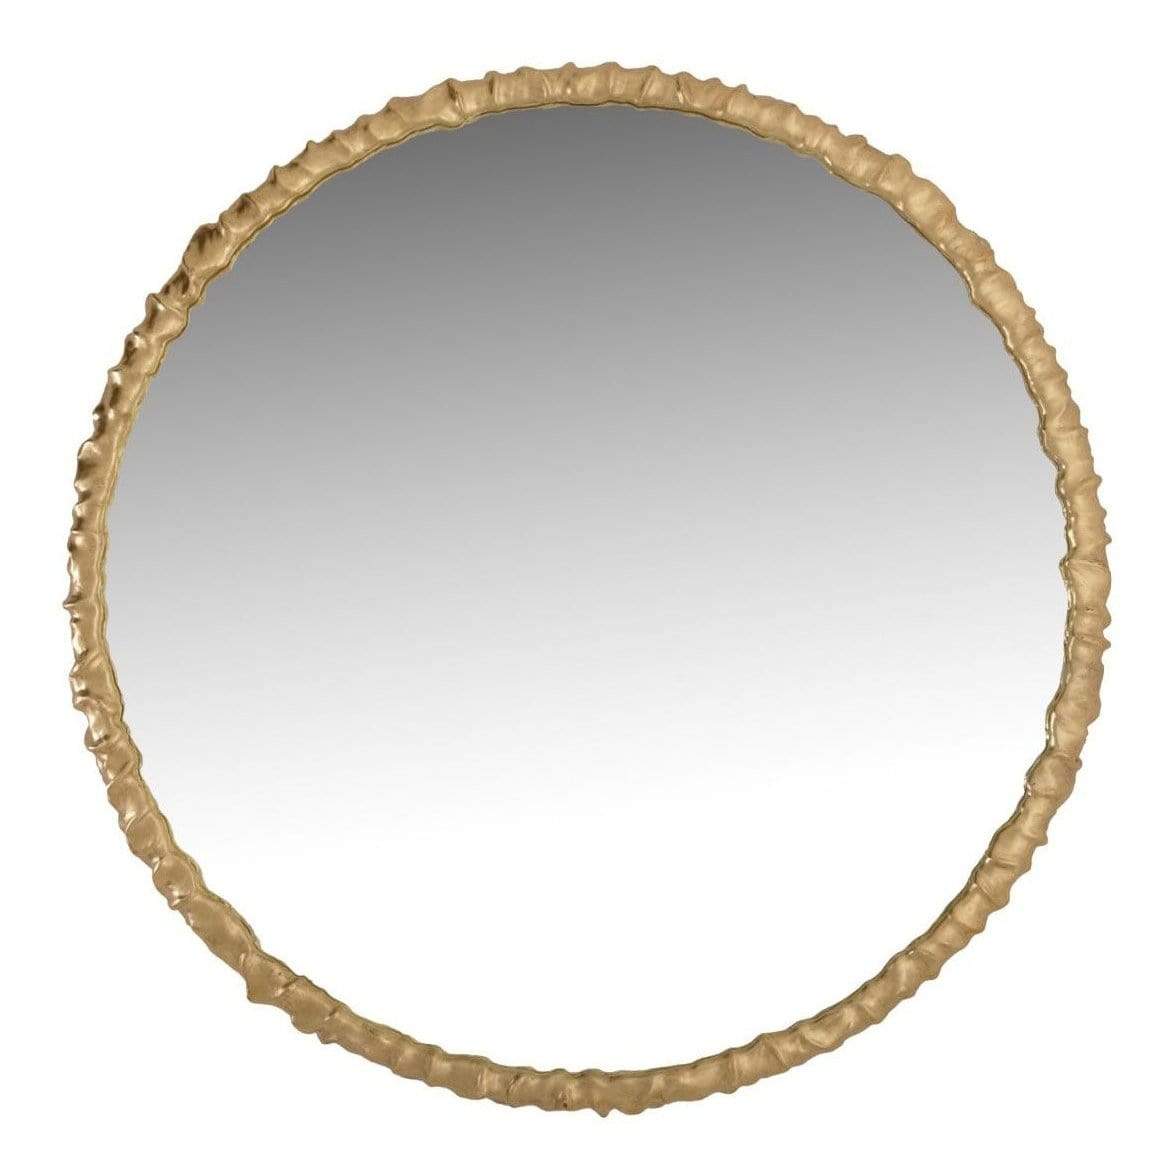 Oly Studio River Round Mirror Wall